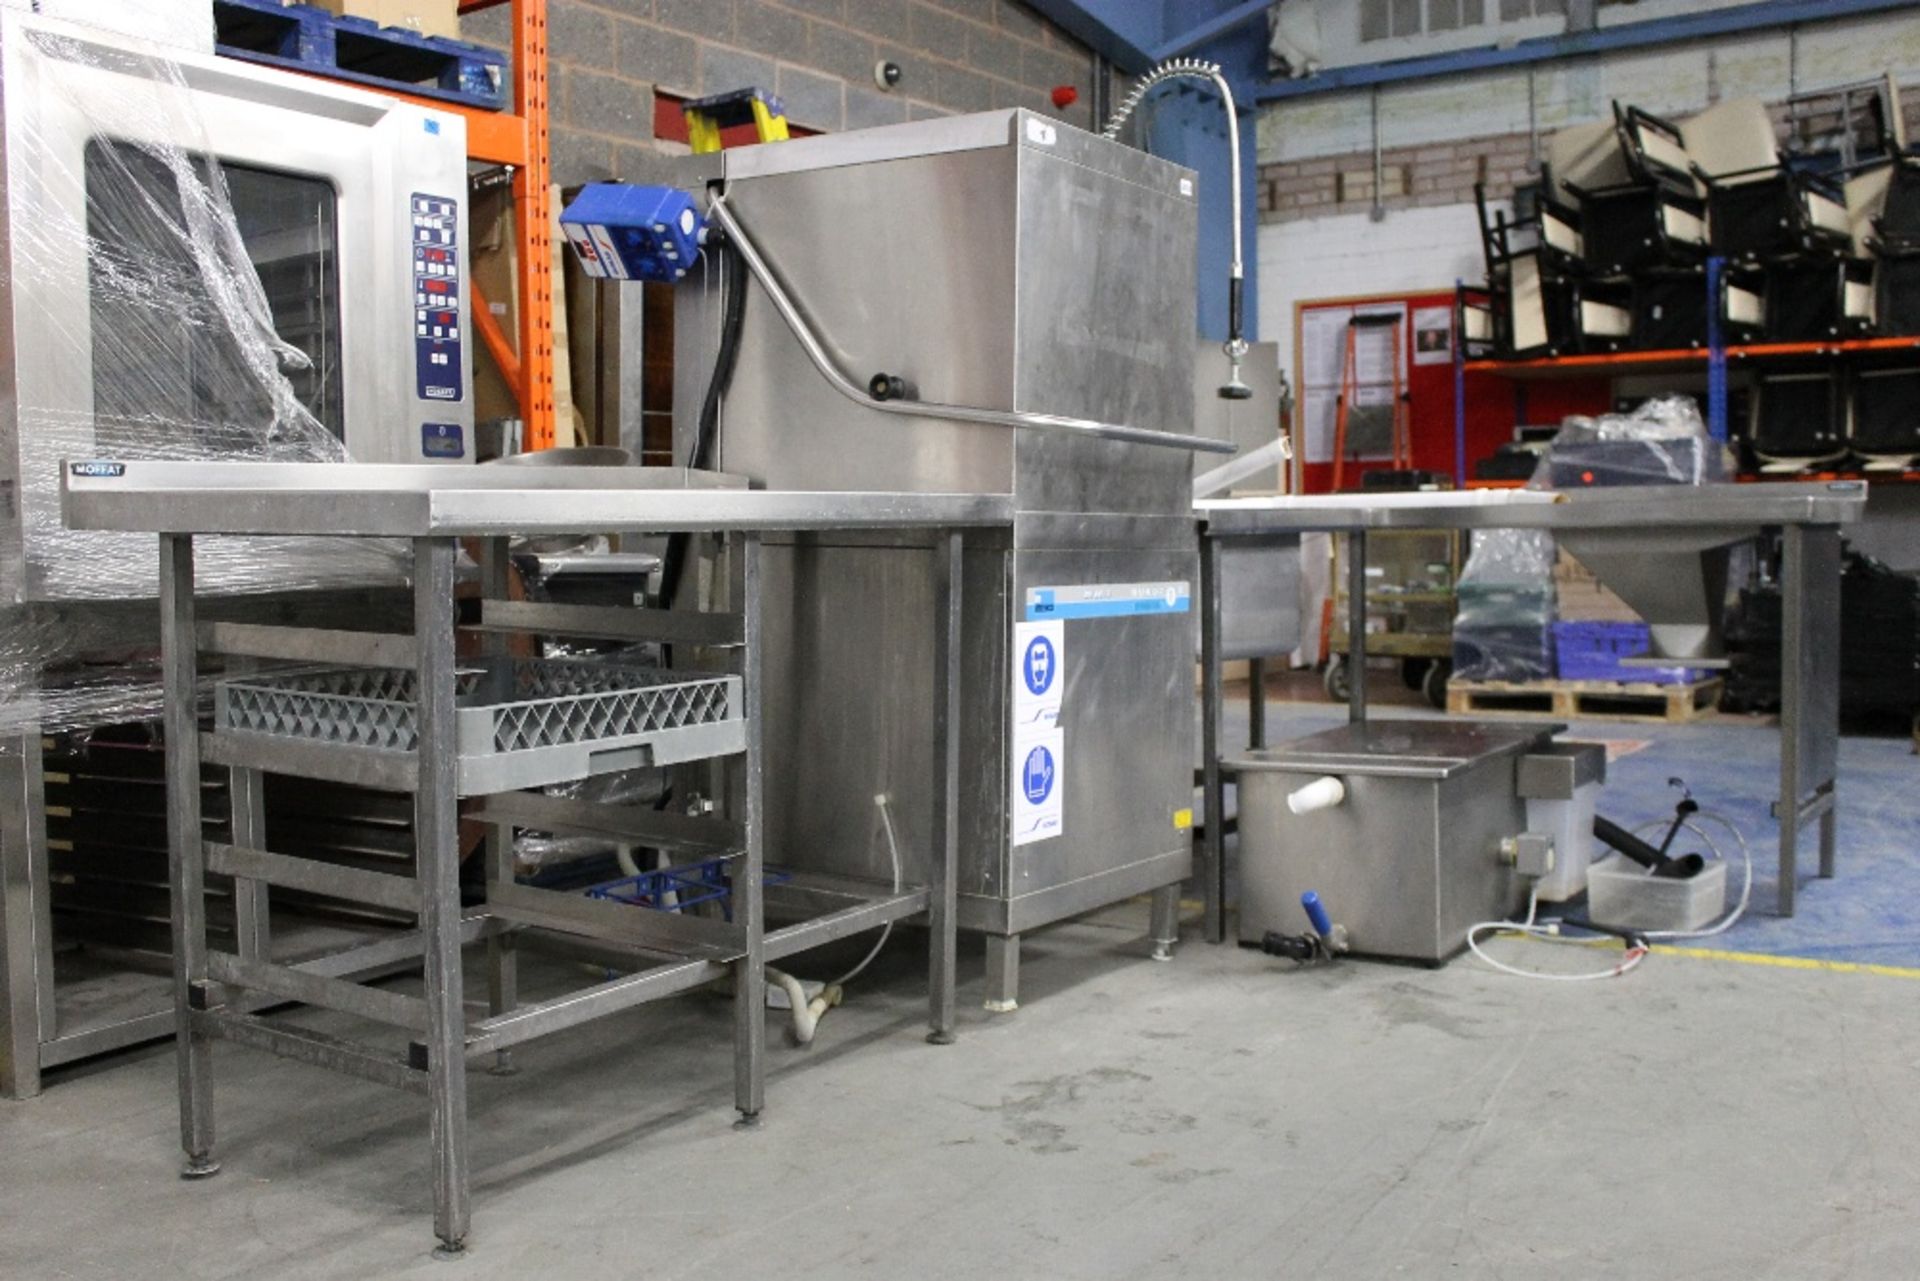 Meiko AV 80.2 Pass Through Dishwasher Complete Unit with Grease Trap Wash Baskets + Moffat Feed - Image 2 of 6